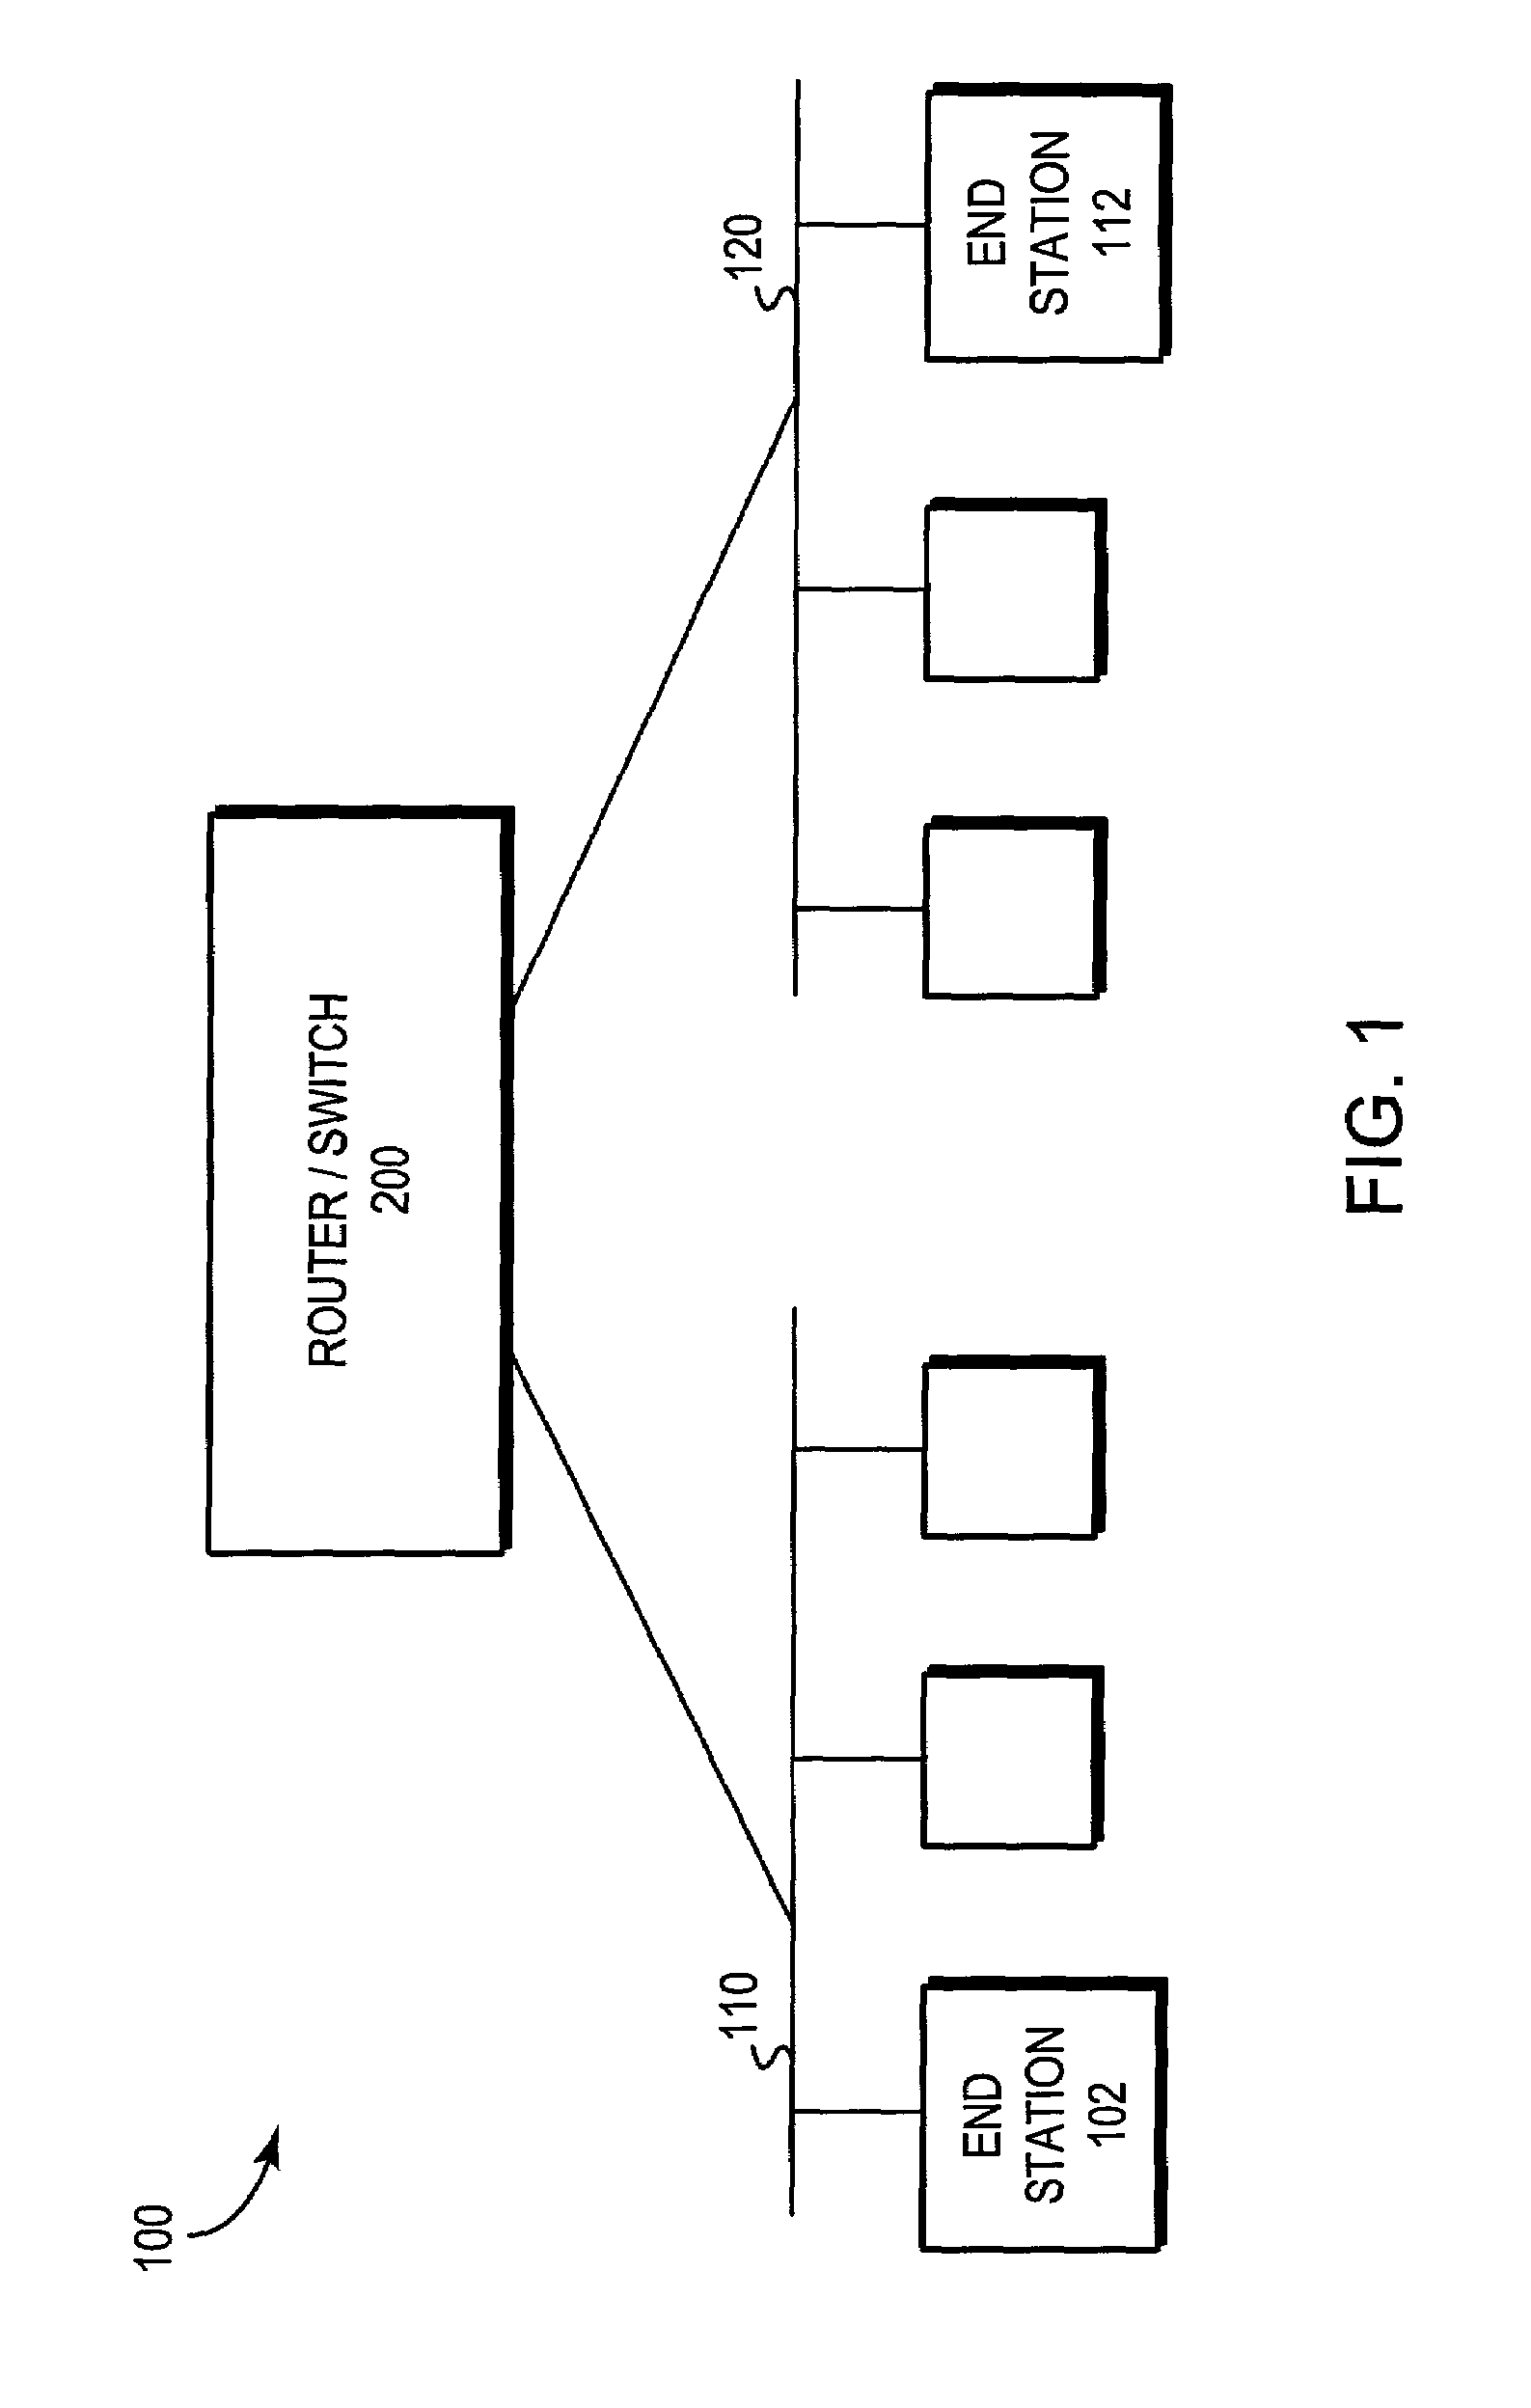 Boundary synchronization mechanism for a processor of a systolic array